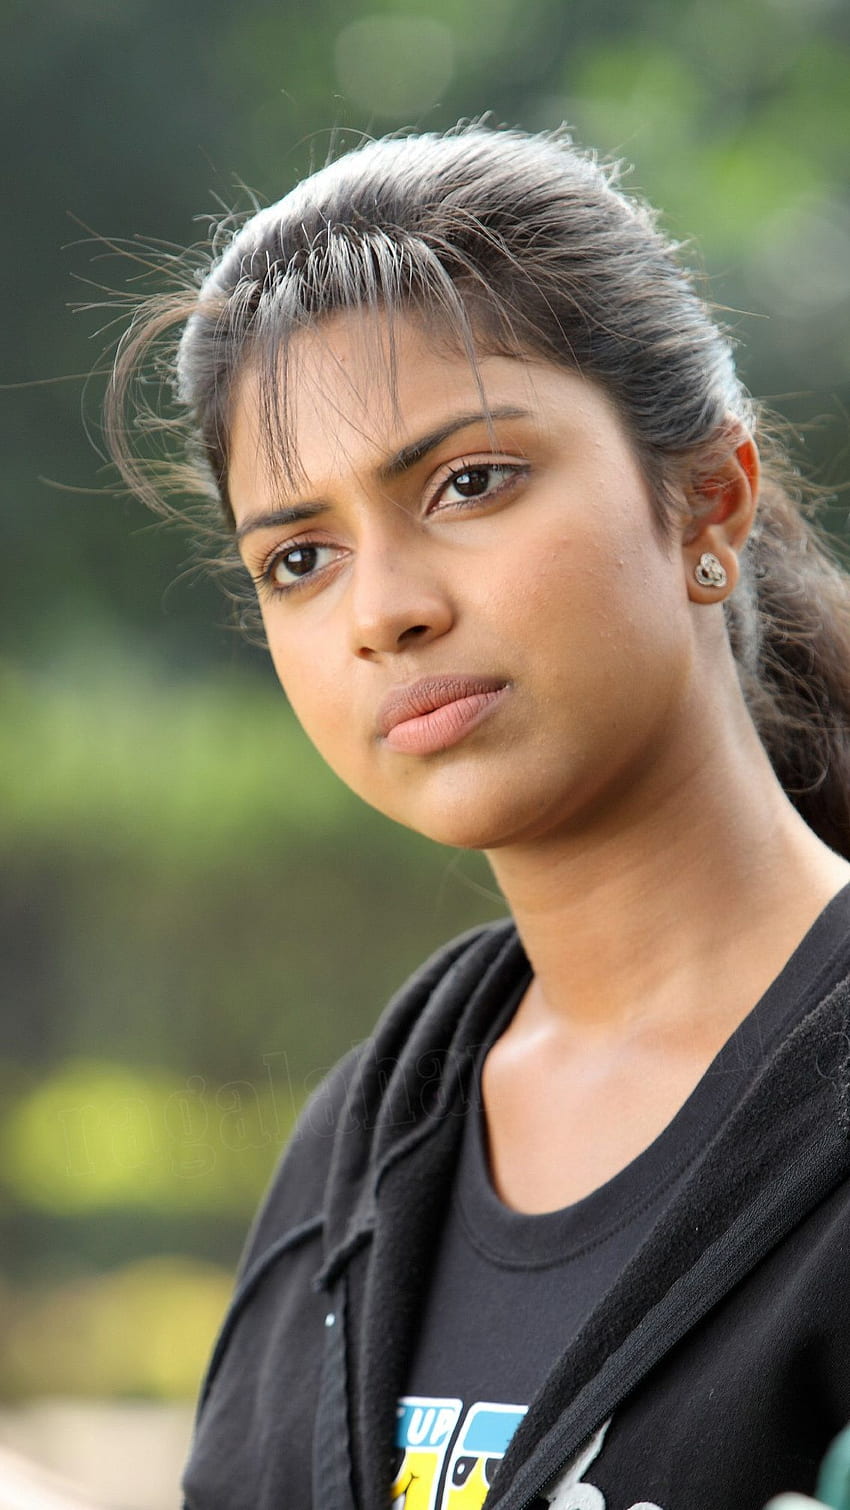 15 Amala Paul Wallpapers Download For Free HQ